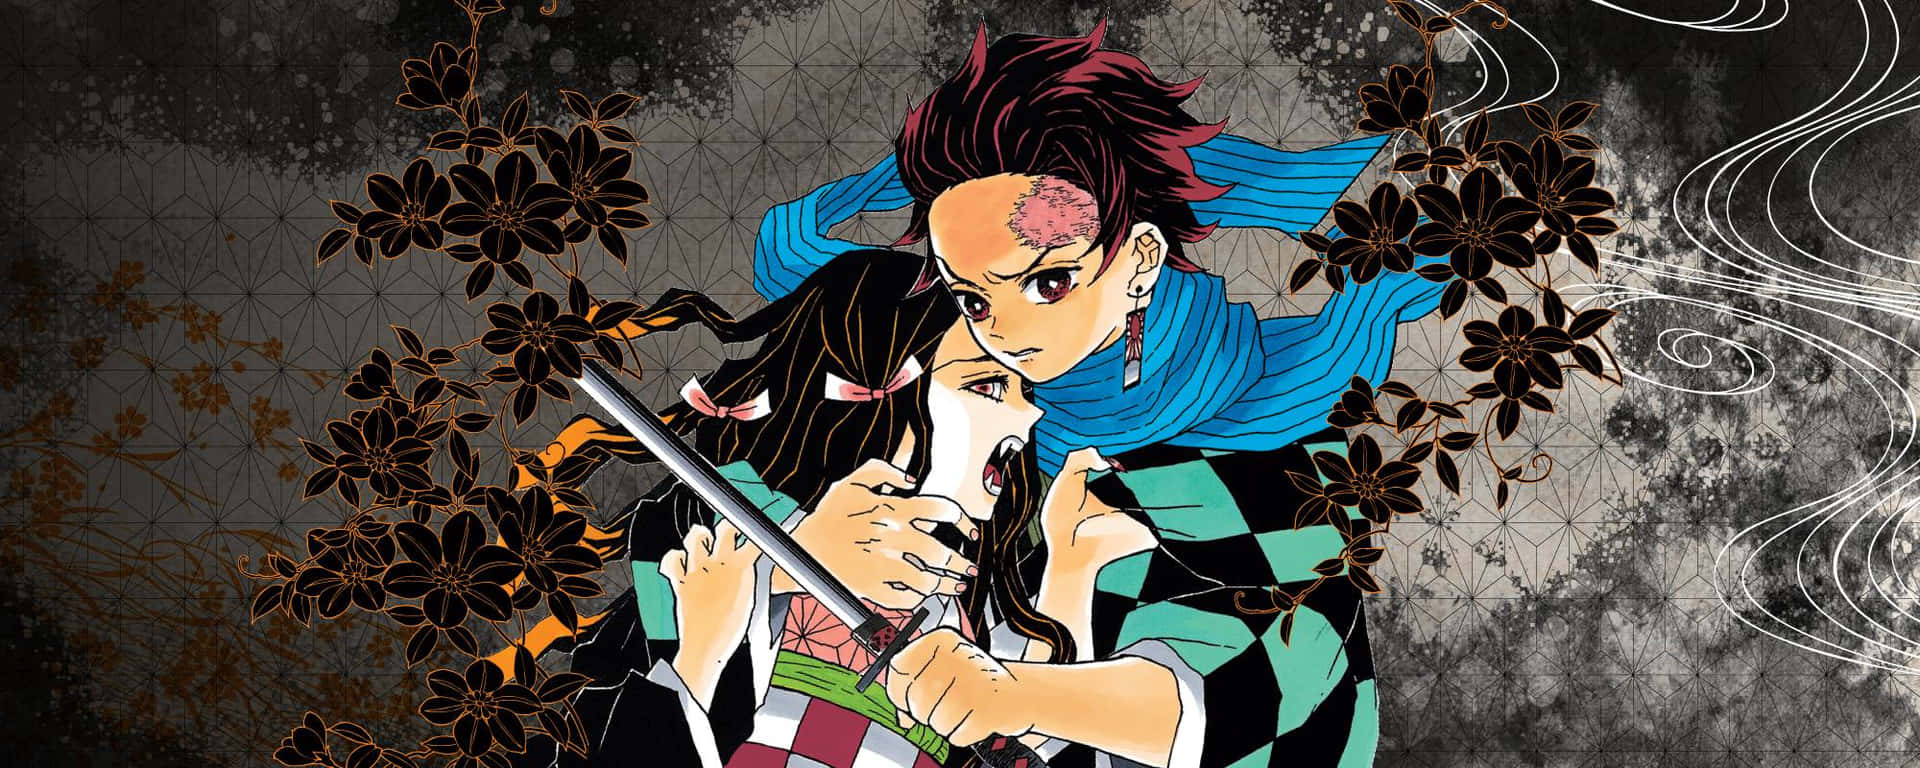 Join Tanjiro And His Friends On Their Quest To Save Nezuko In Demon Slayer Manga